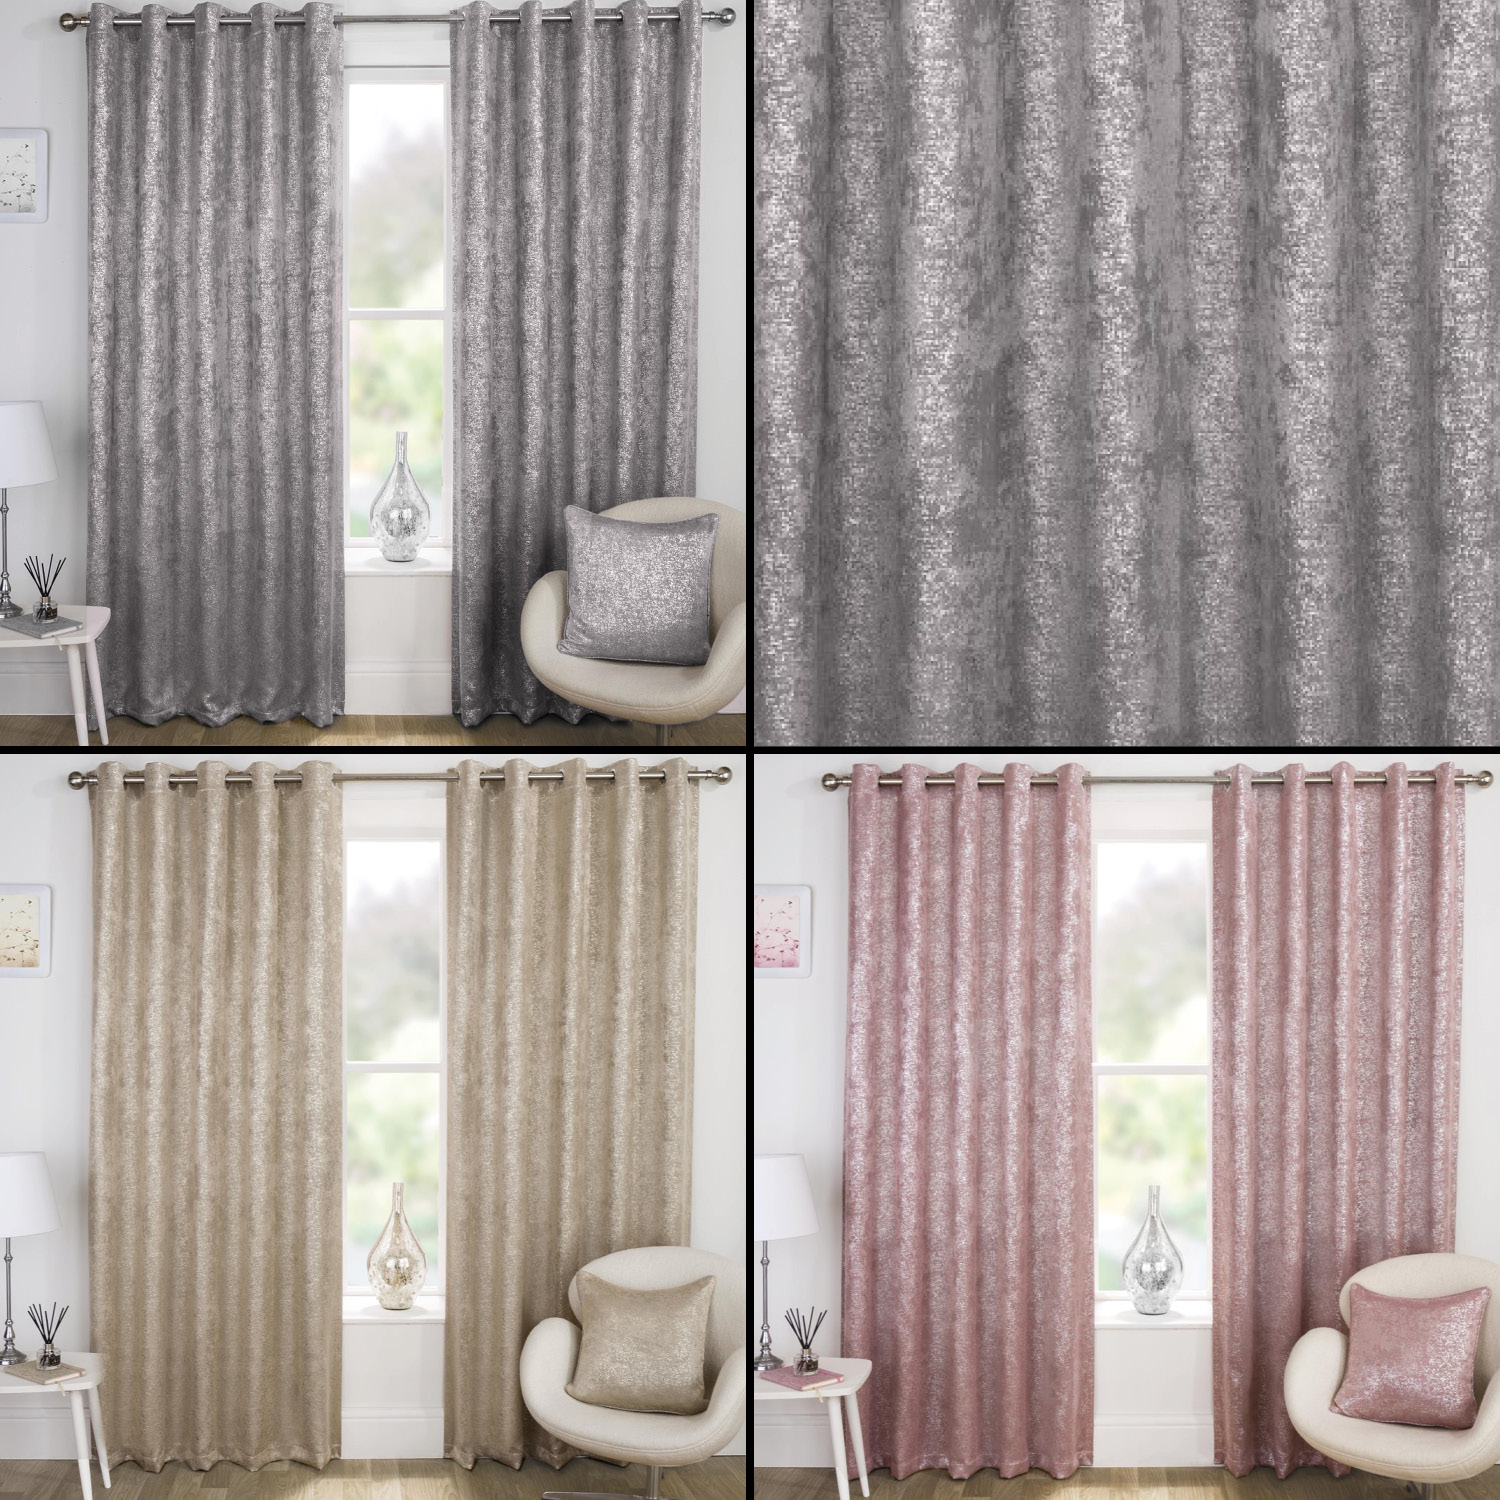 block out curtains with full block out lining